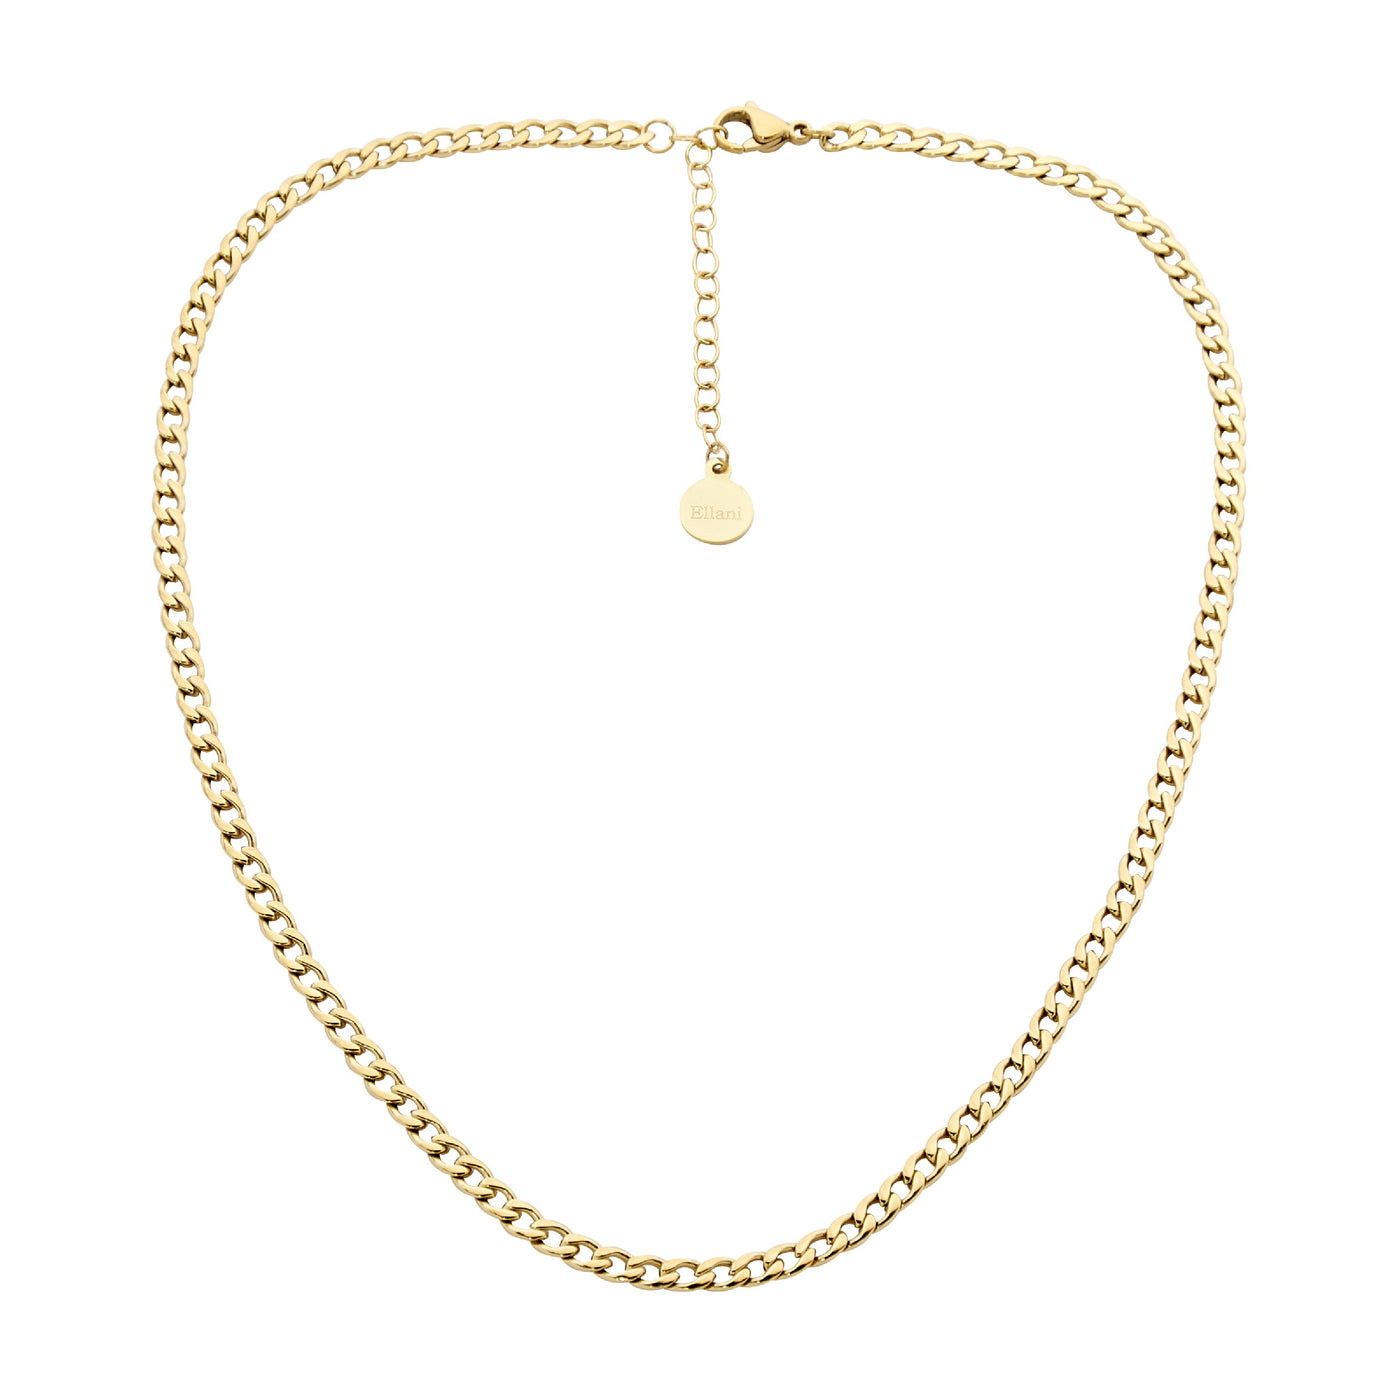 Gold Plated Stainless steel curb chain necklace